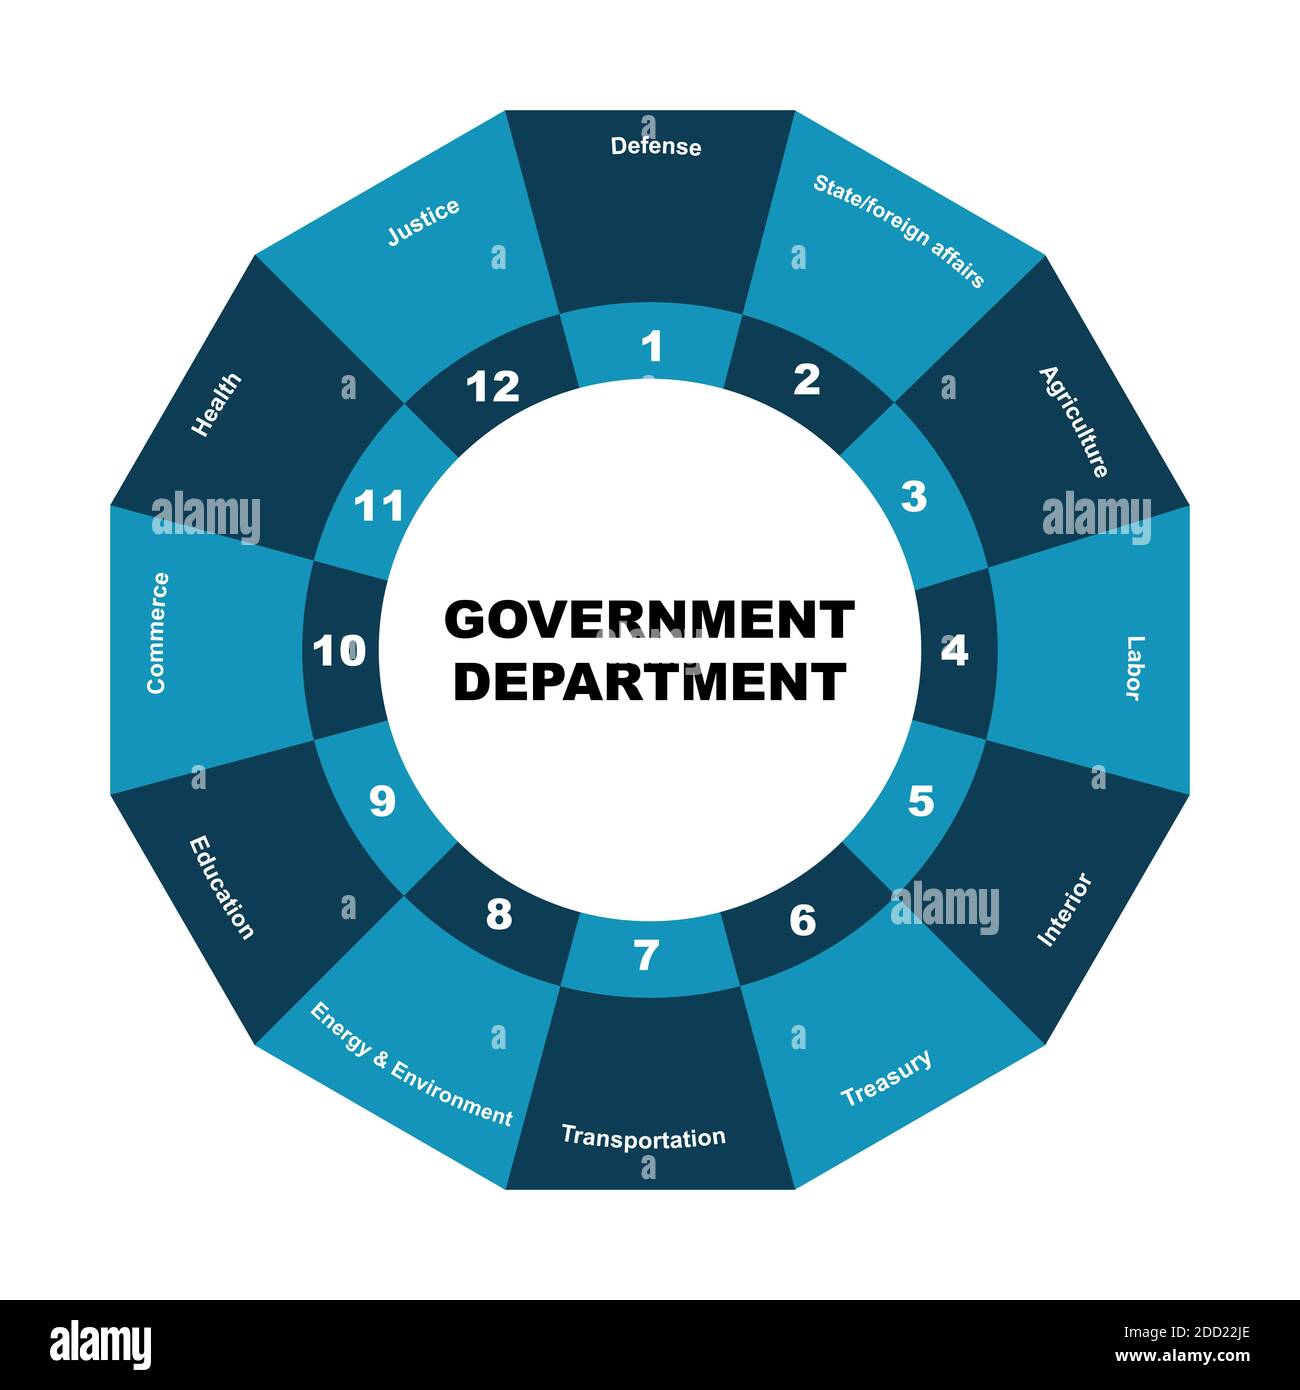 https://c8.alamy.com/comp/2DD22JE/diagram-of-government-departments-with-keywords-its-mean-different-branches-eps-10-isolated-on-white-background-2DD22JE.jpg